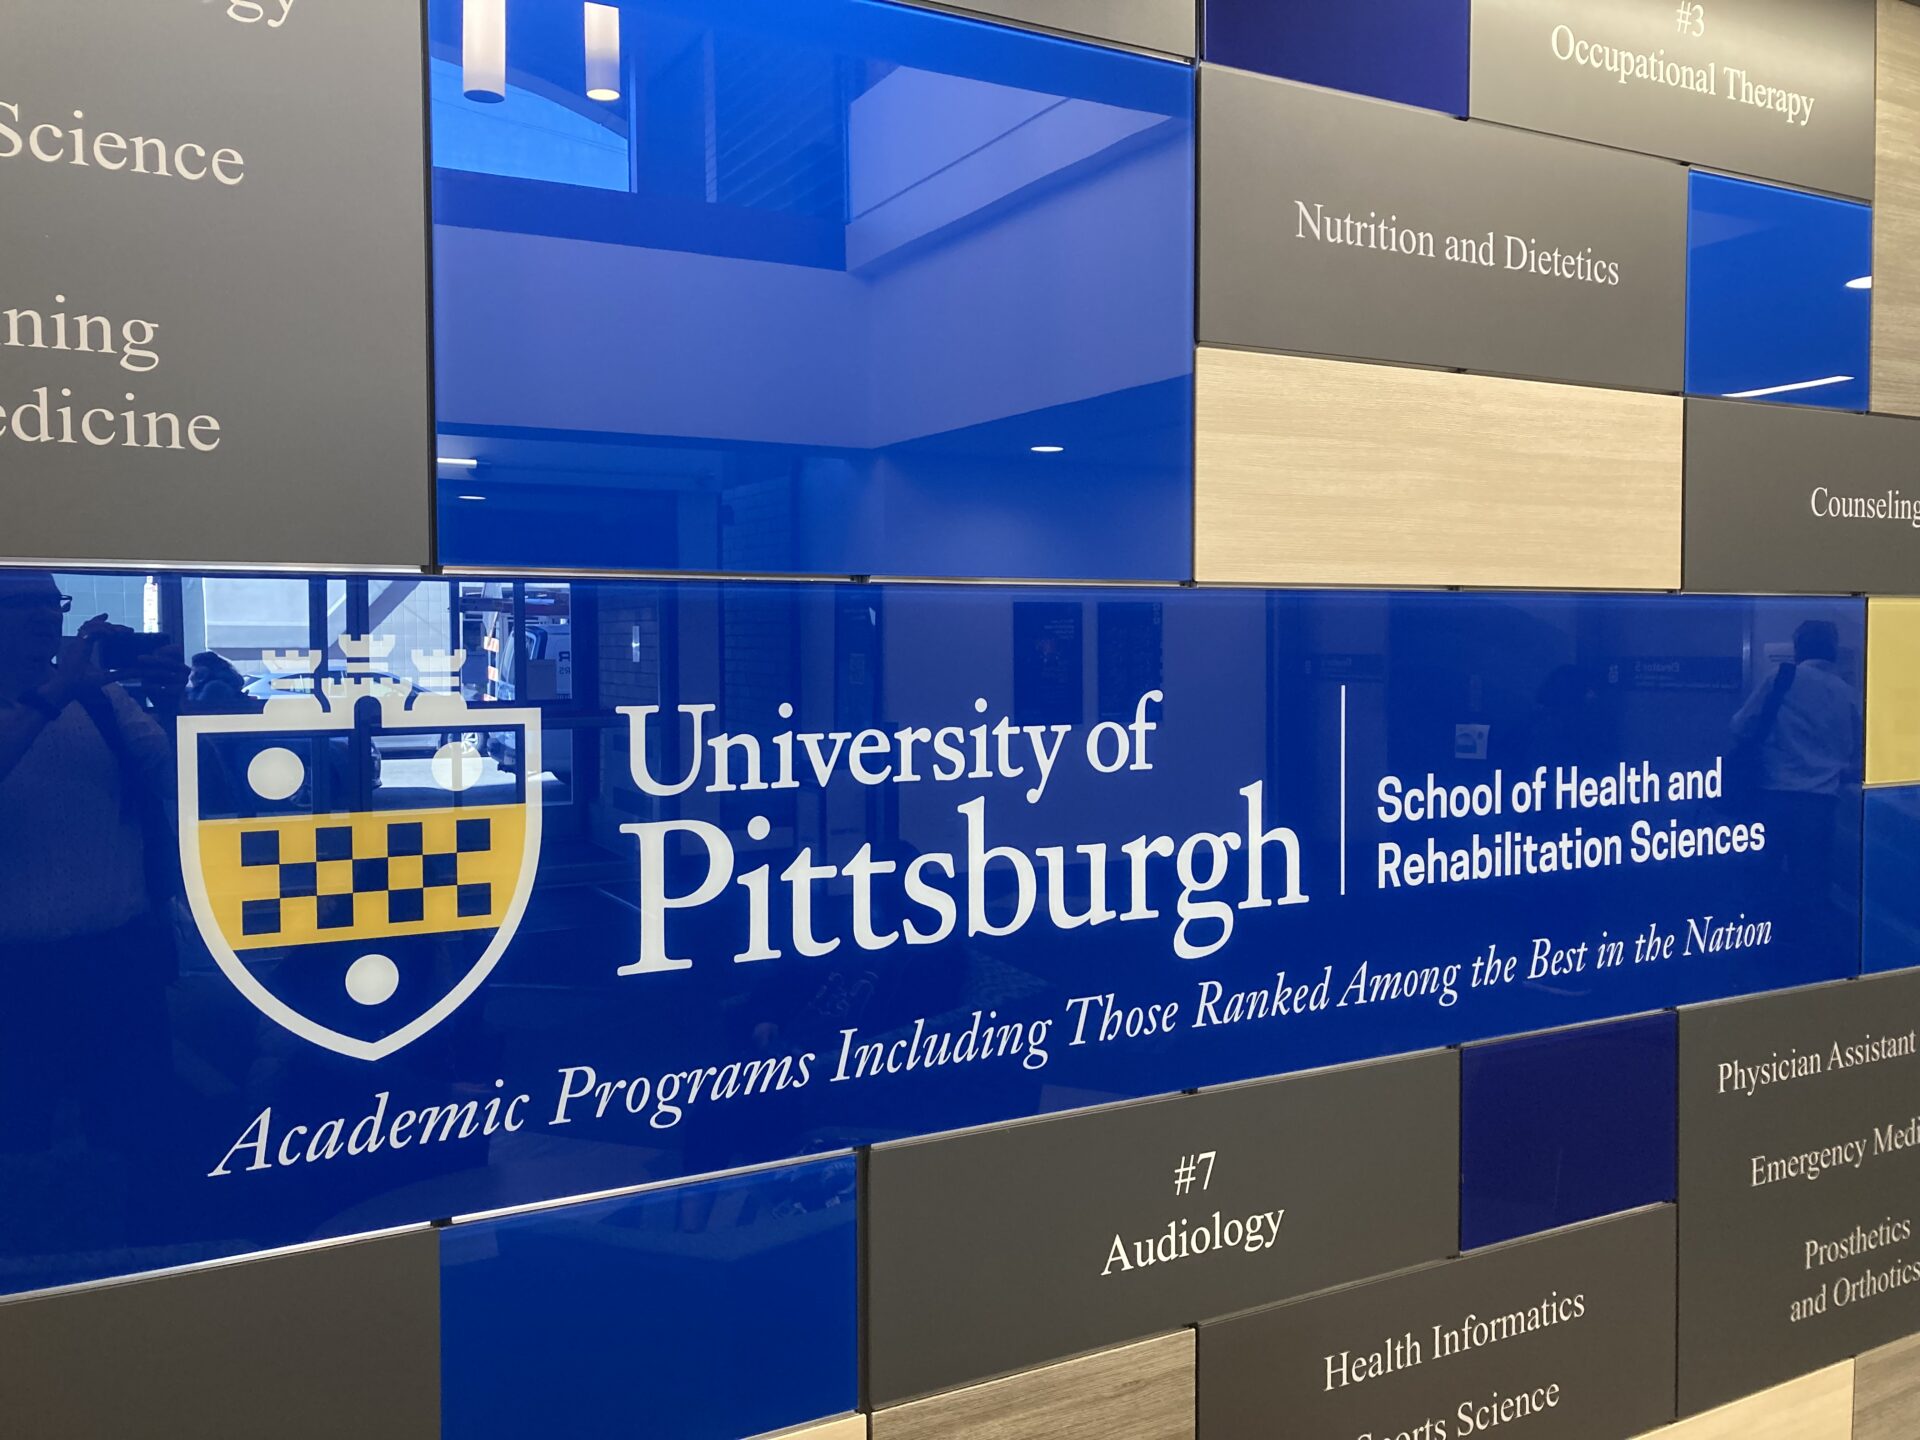 A sign inside University building that reads ‘University of Pittsburgh: School of Health and Rehabilitation Sciences’ and displays the University crest